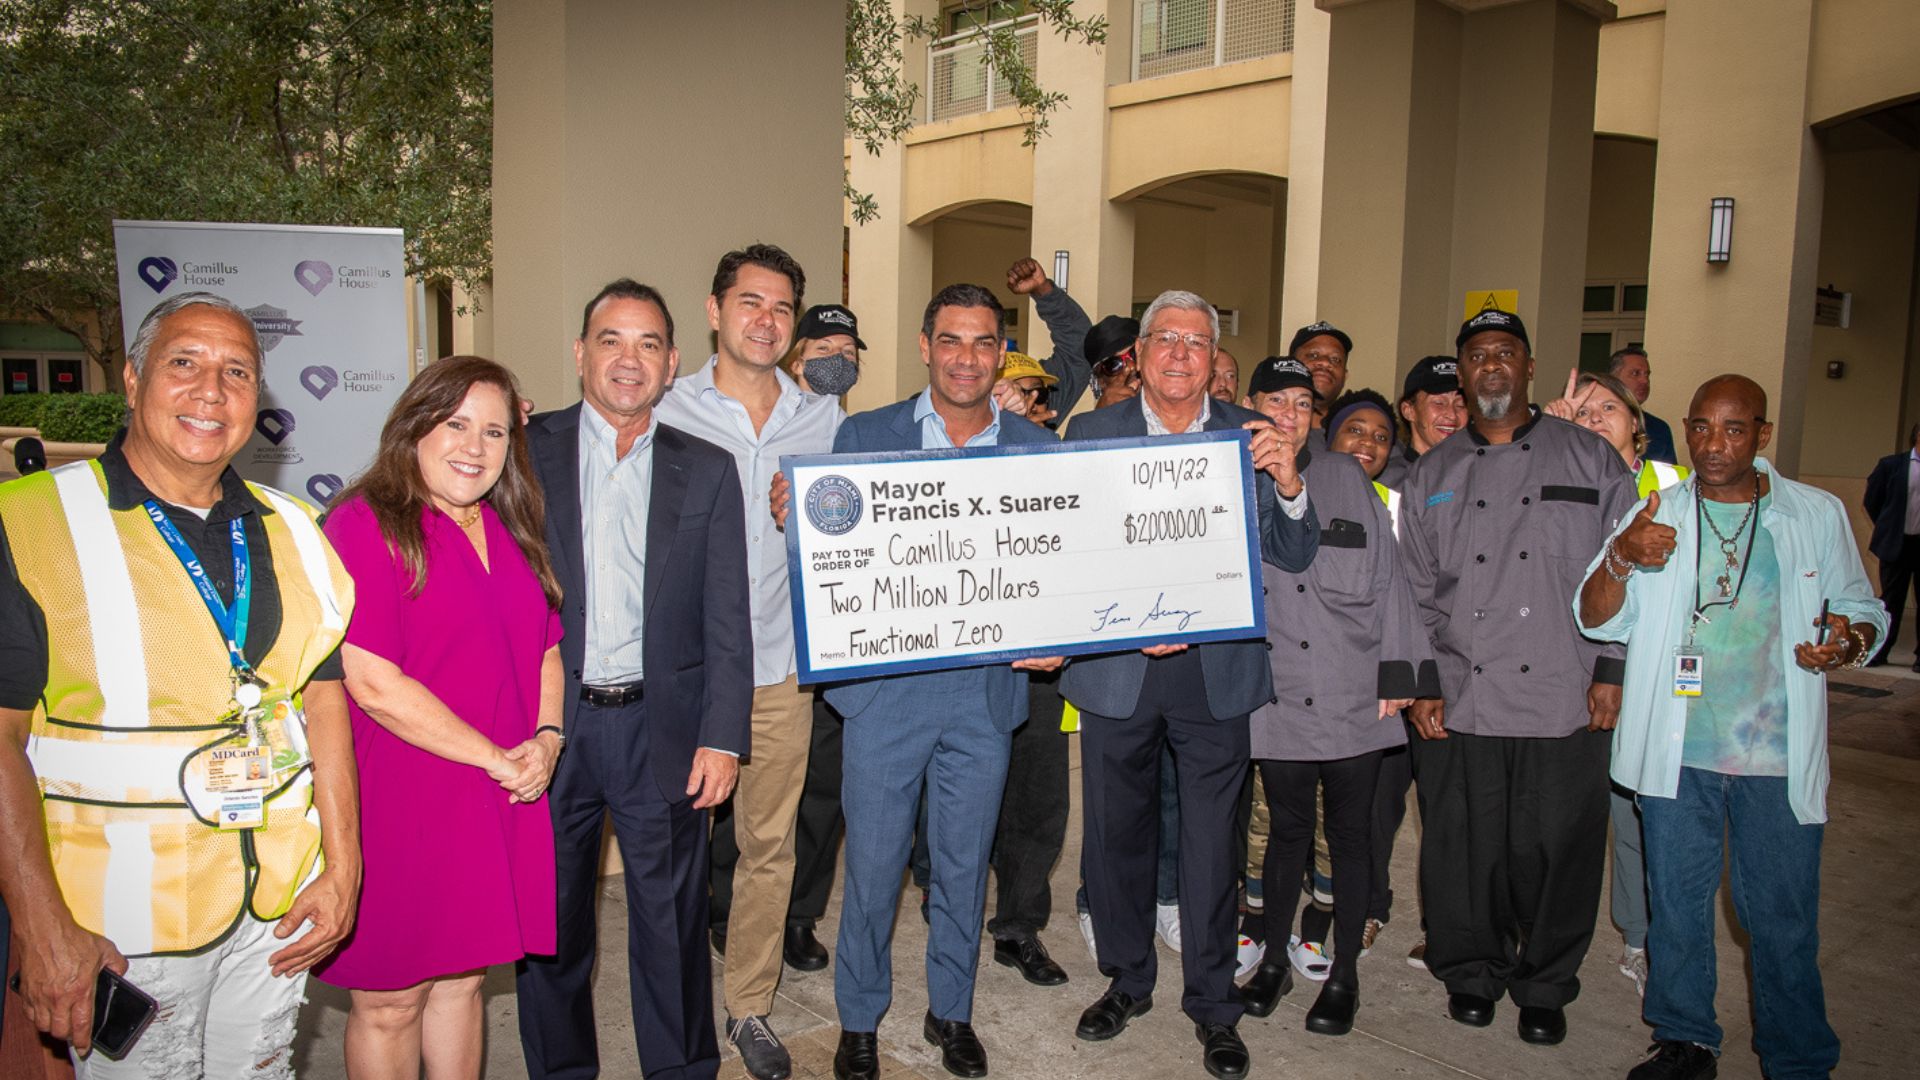 From NBC 6 - Camillus House Receives $2 Million Donation